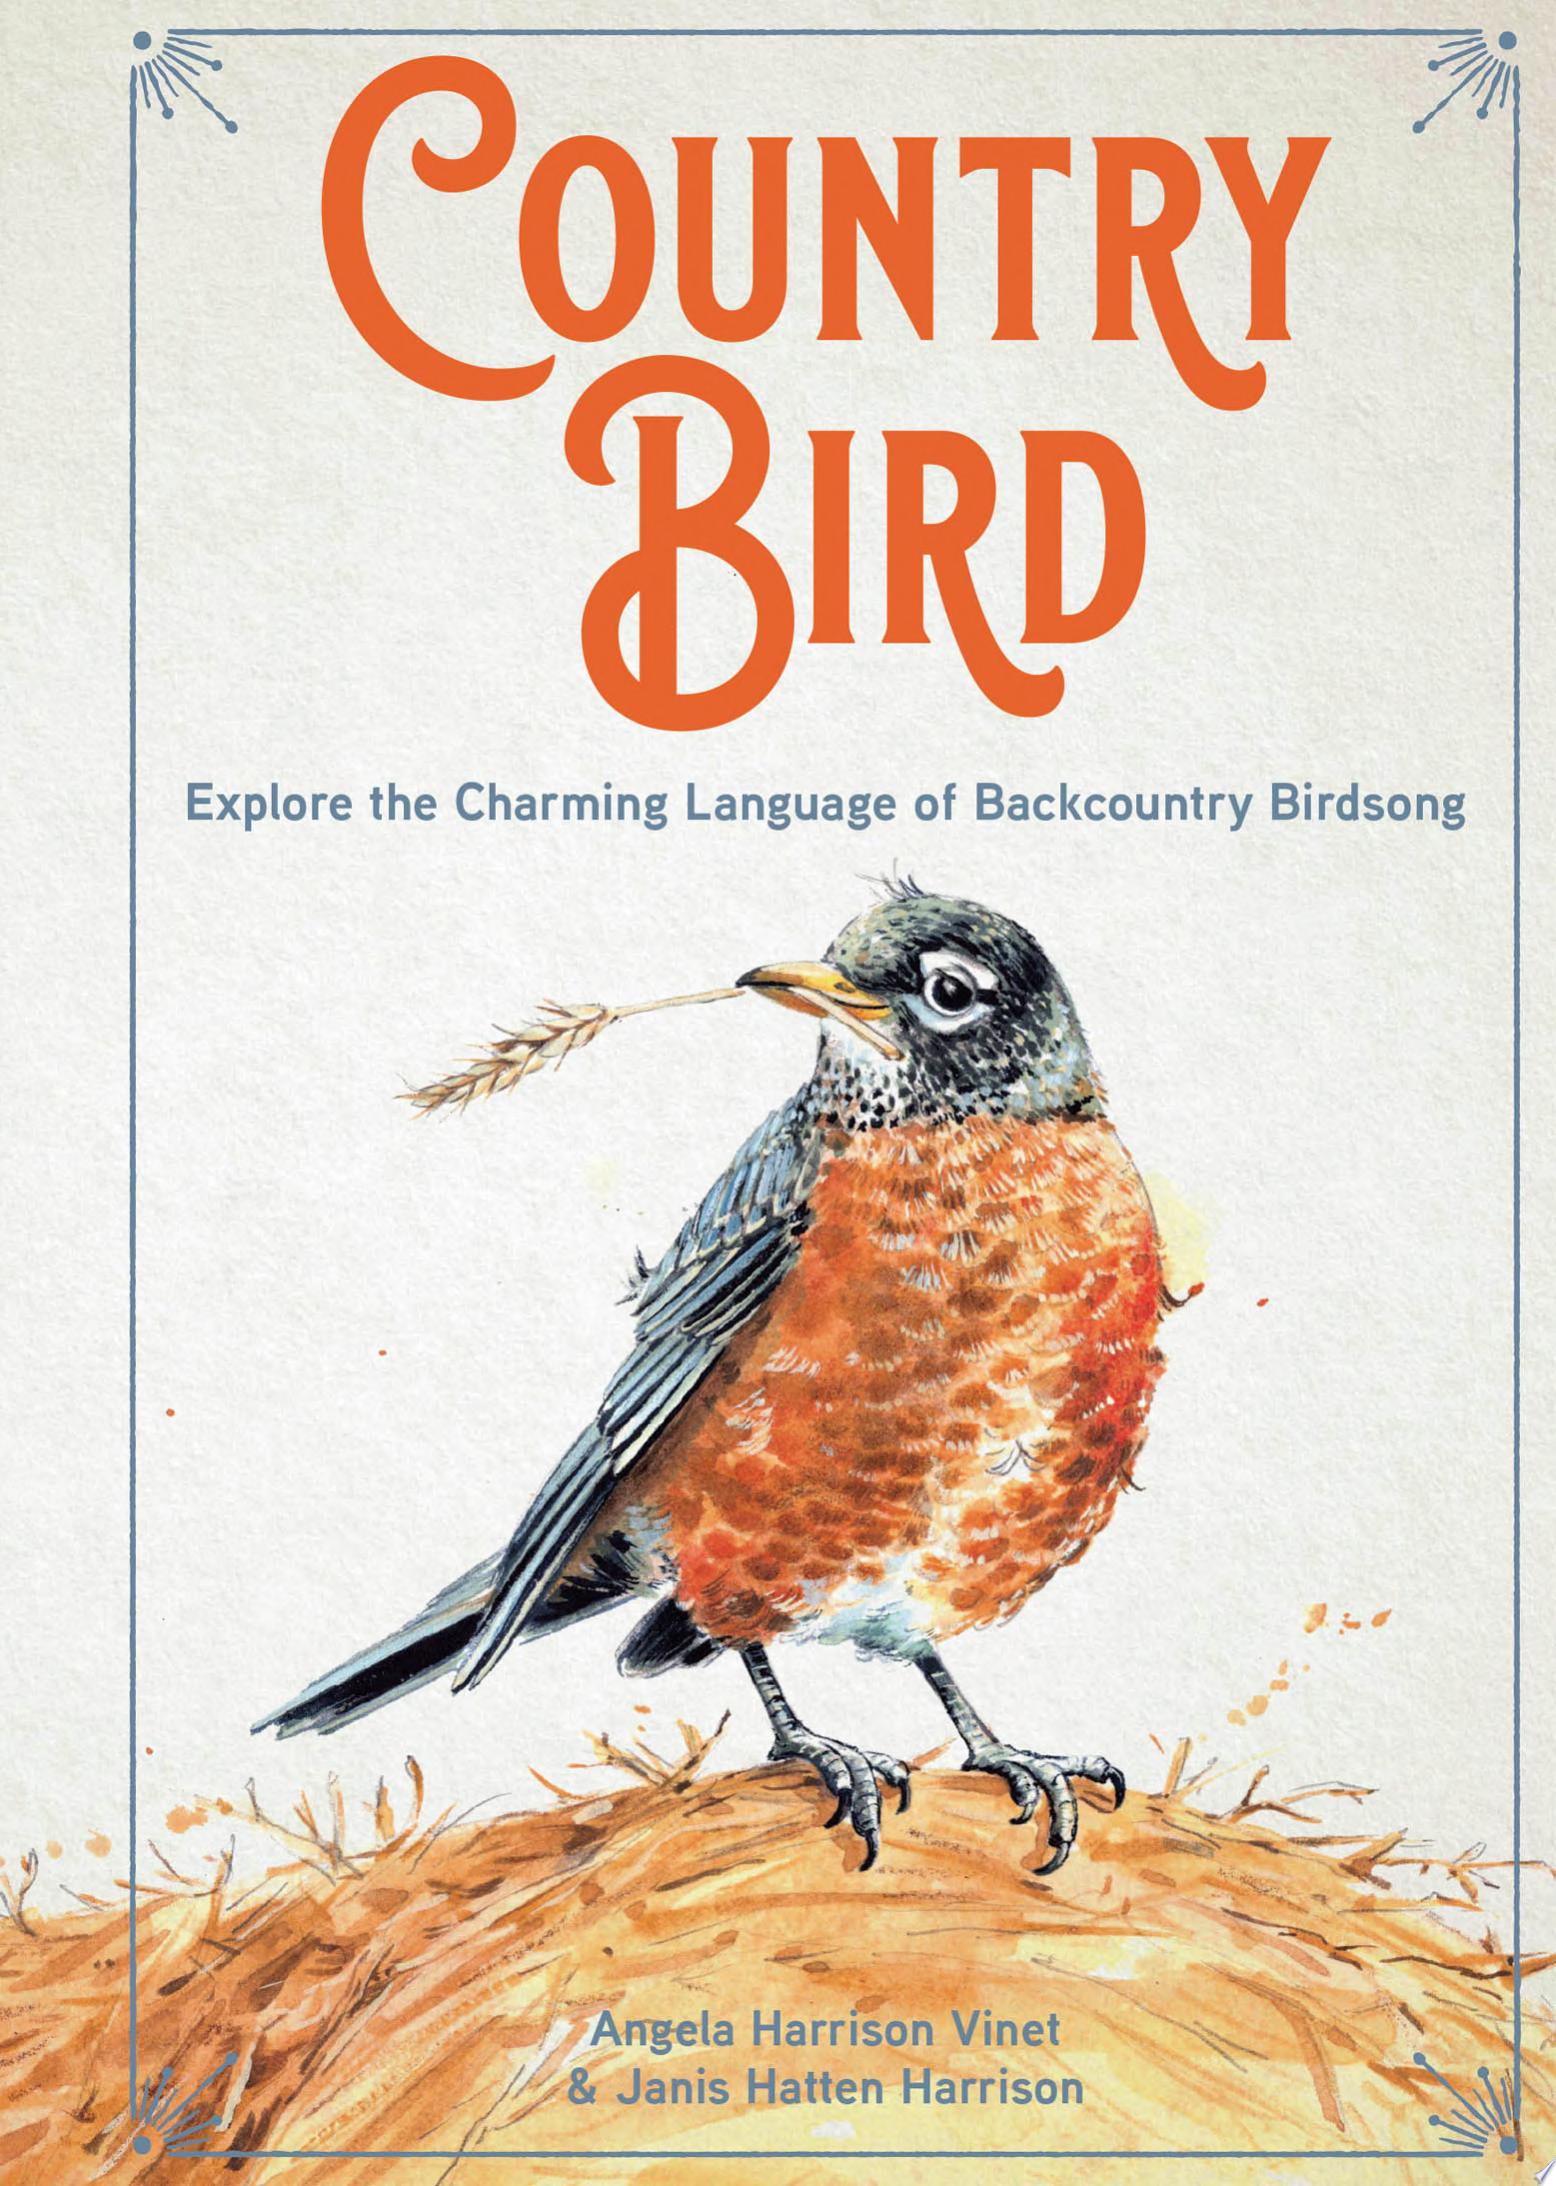 Image for "Country Bird"